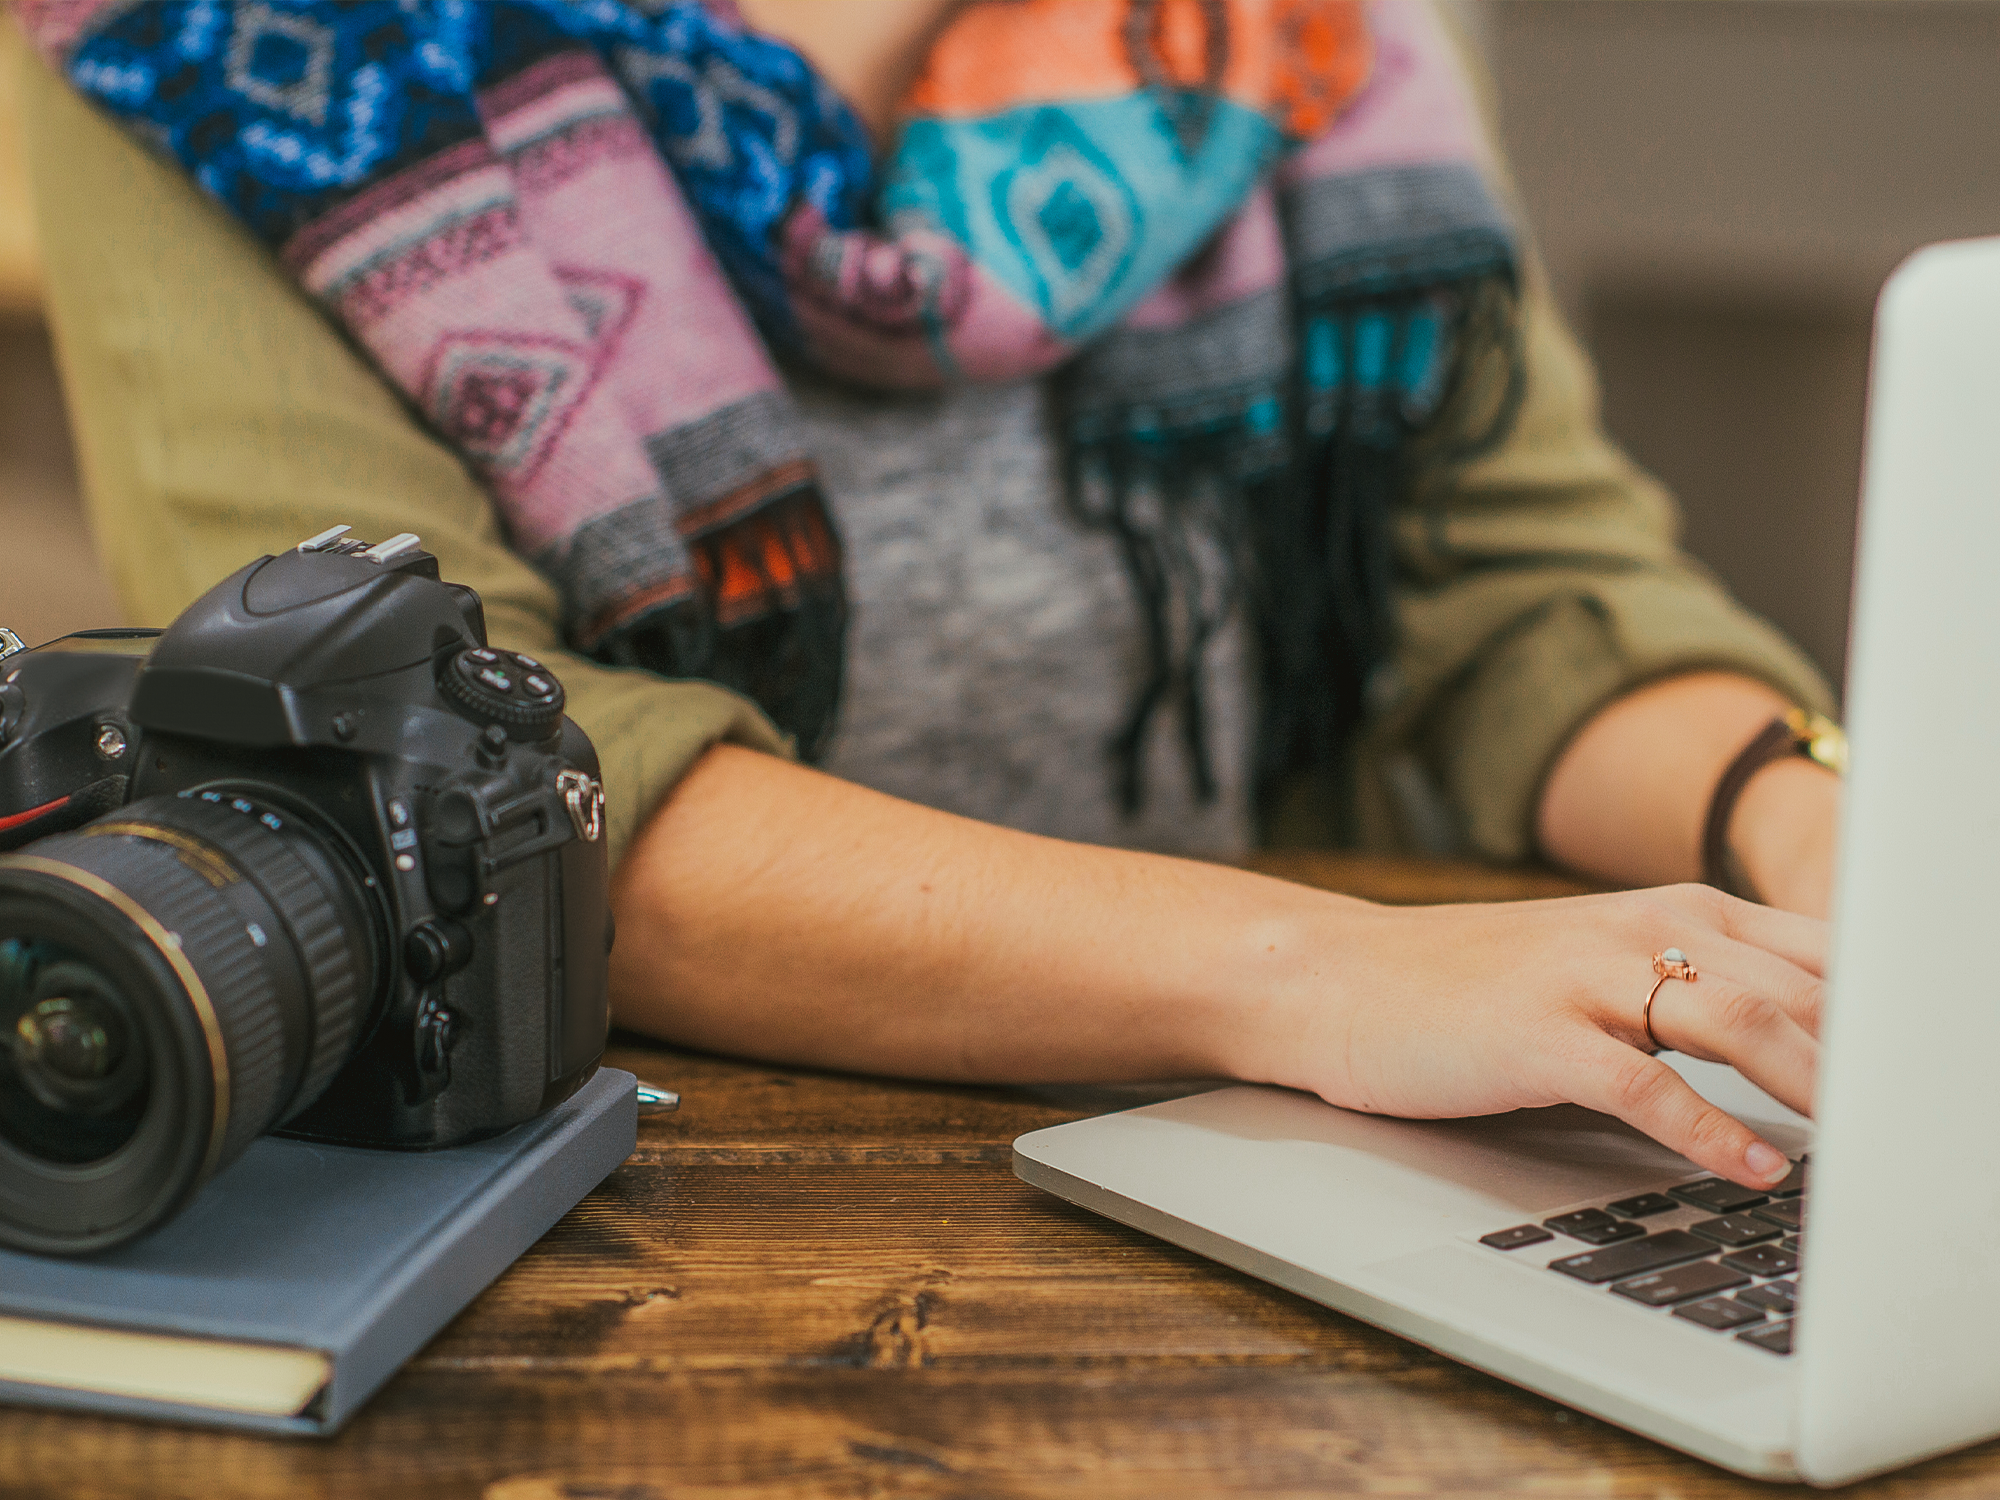 The Top 4 Photography Websites to Showcase Your Work